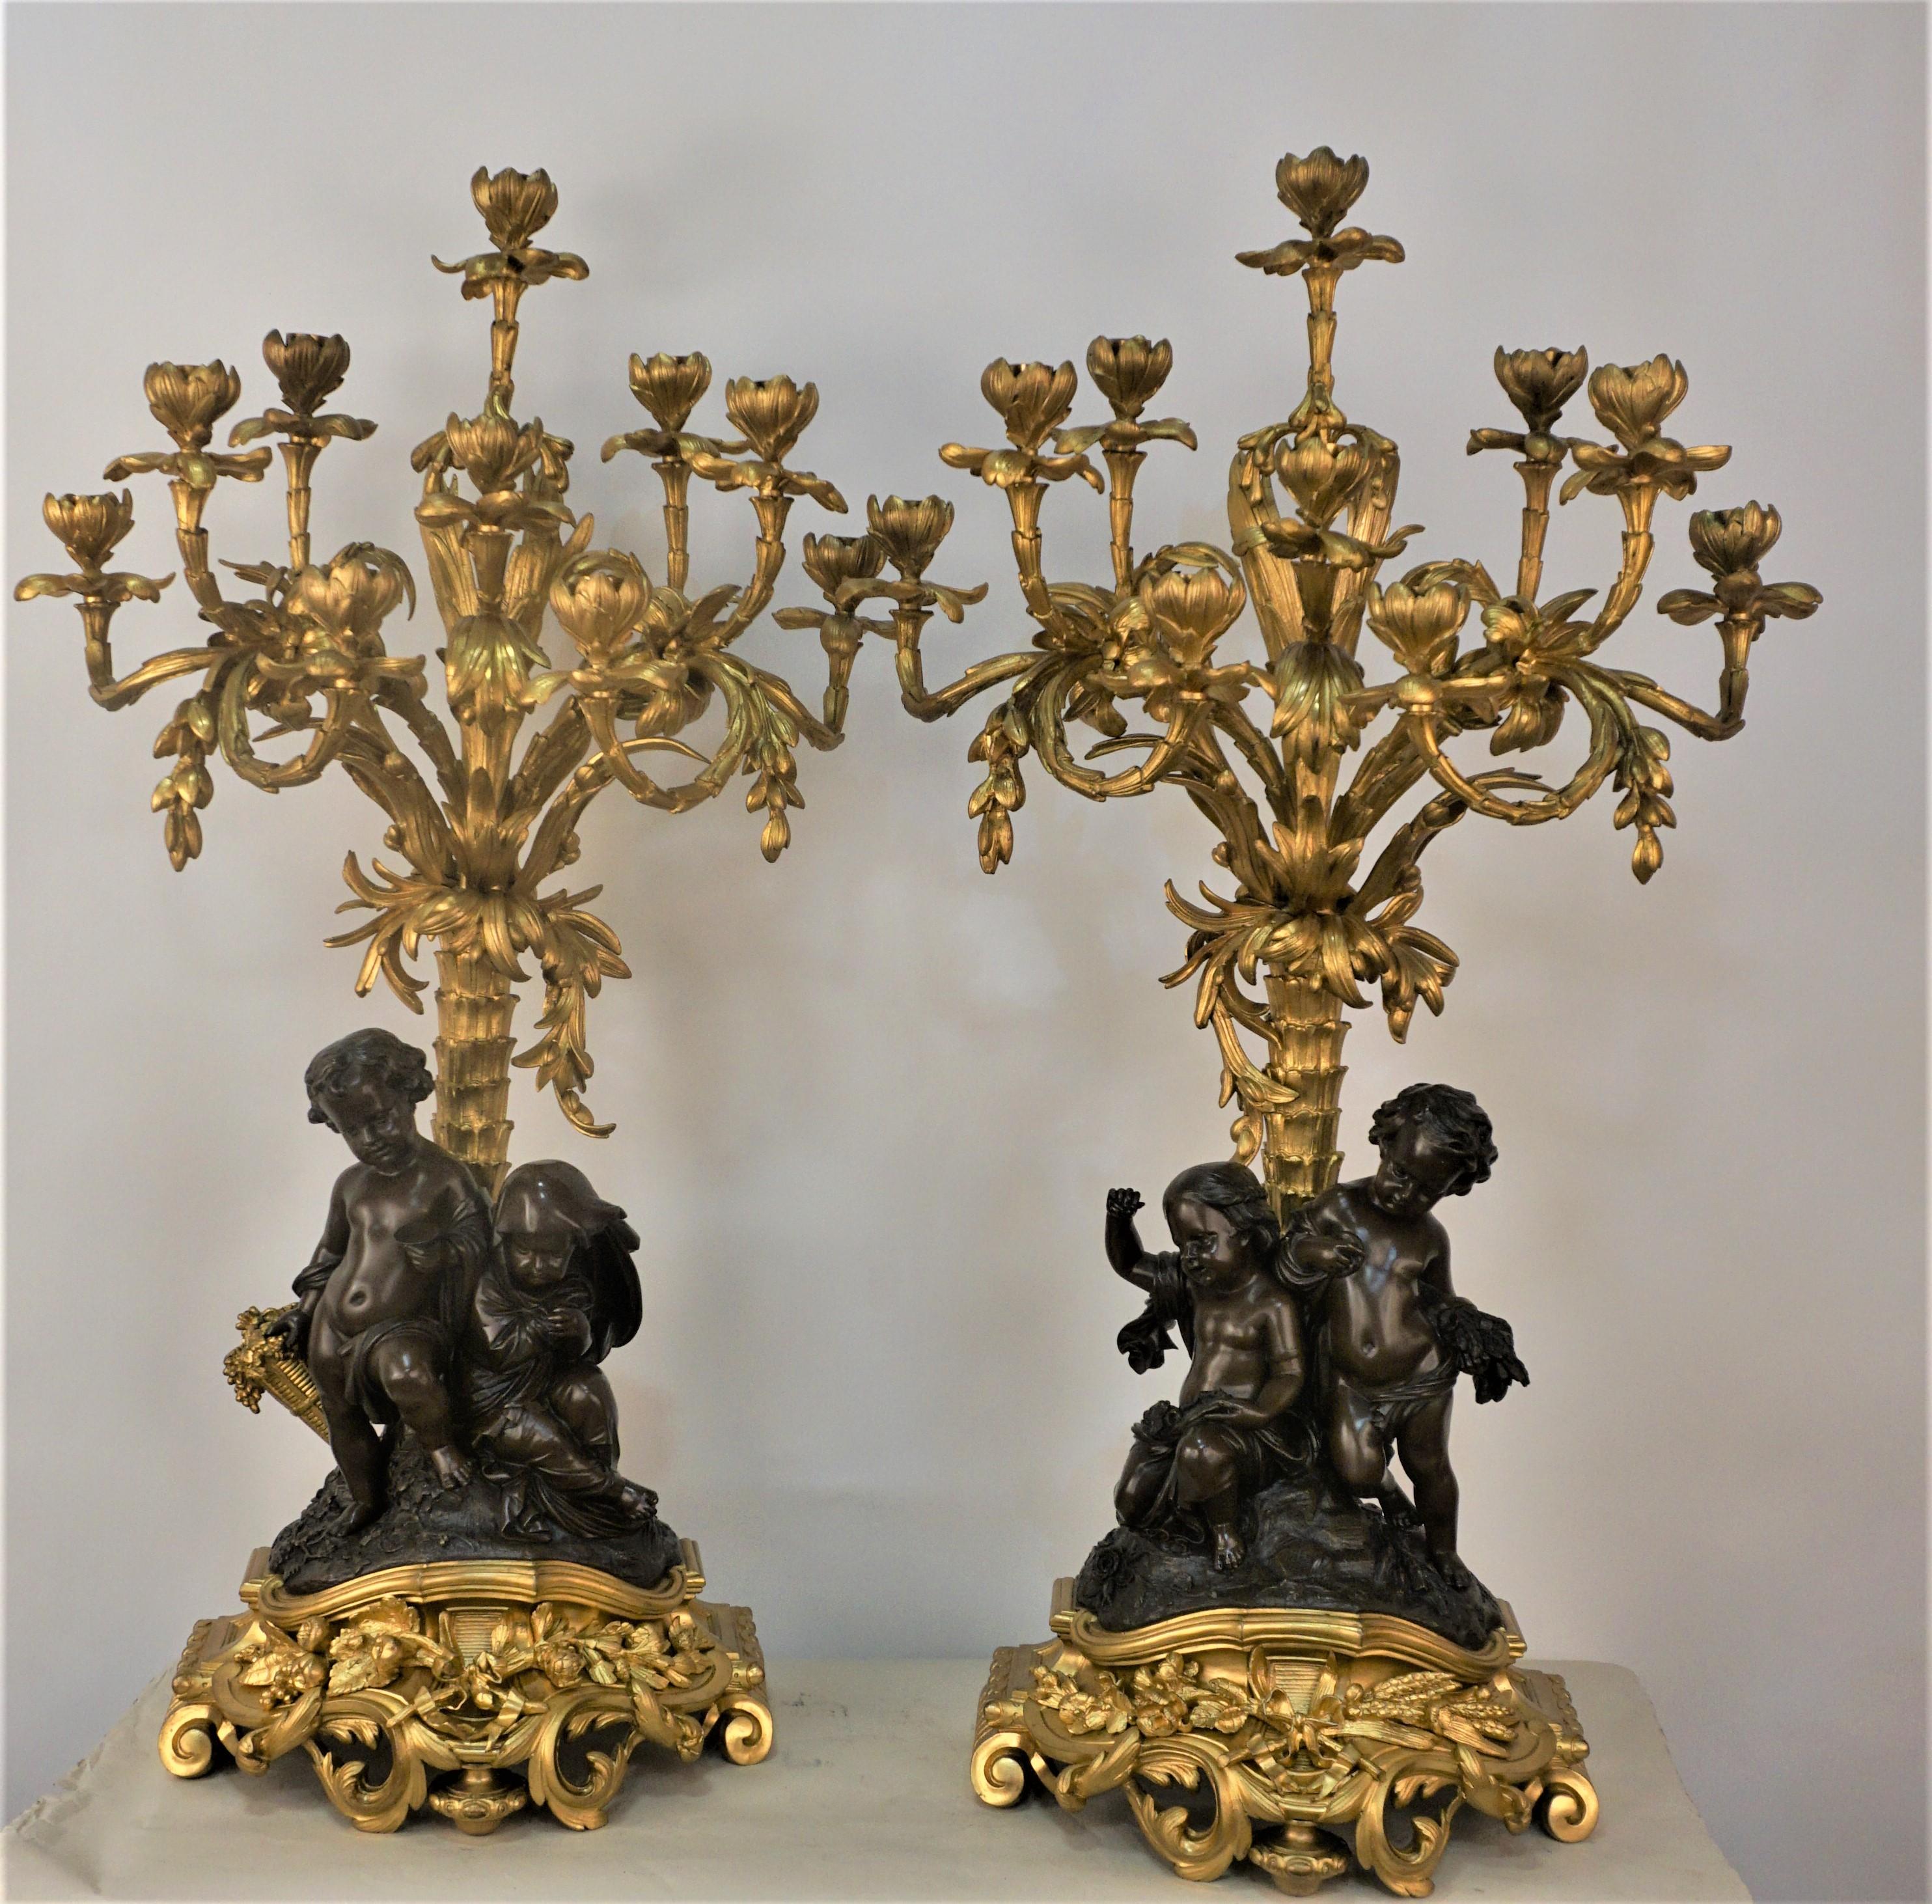 Pair of 19th century ten light candelabra with patinated and Dore bronze finish by Henry Picard Paris. These candelabras are 36.5